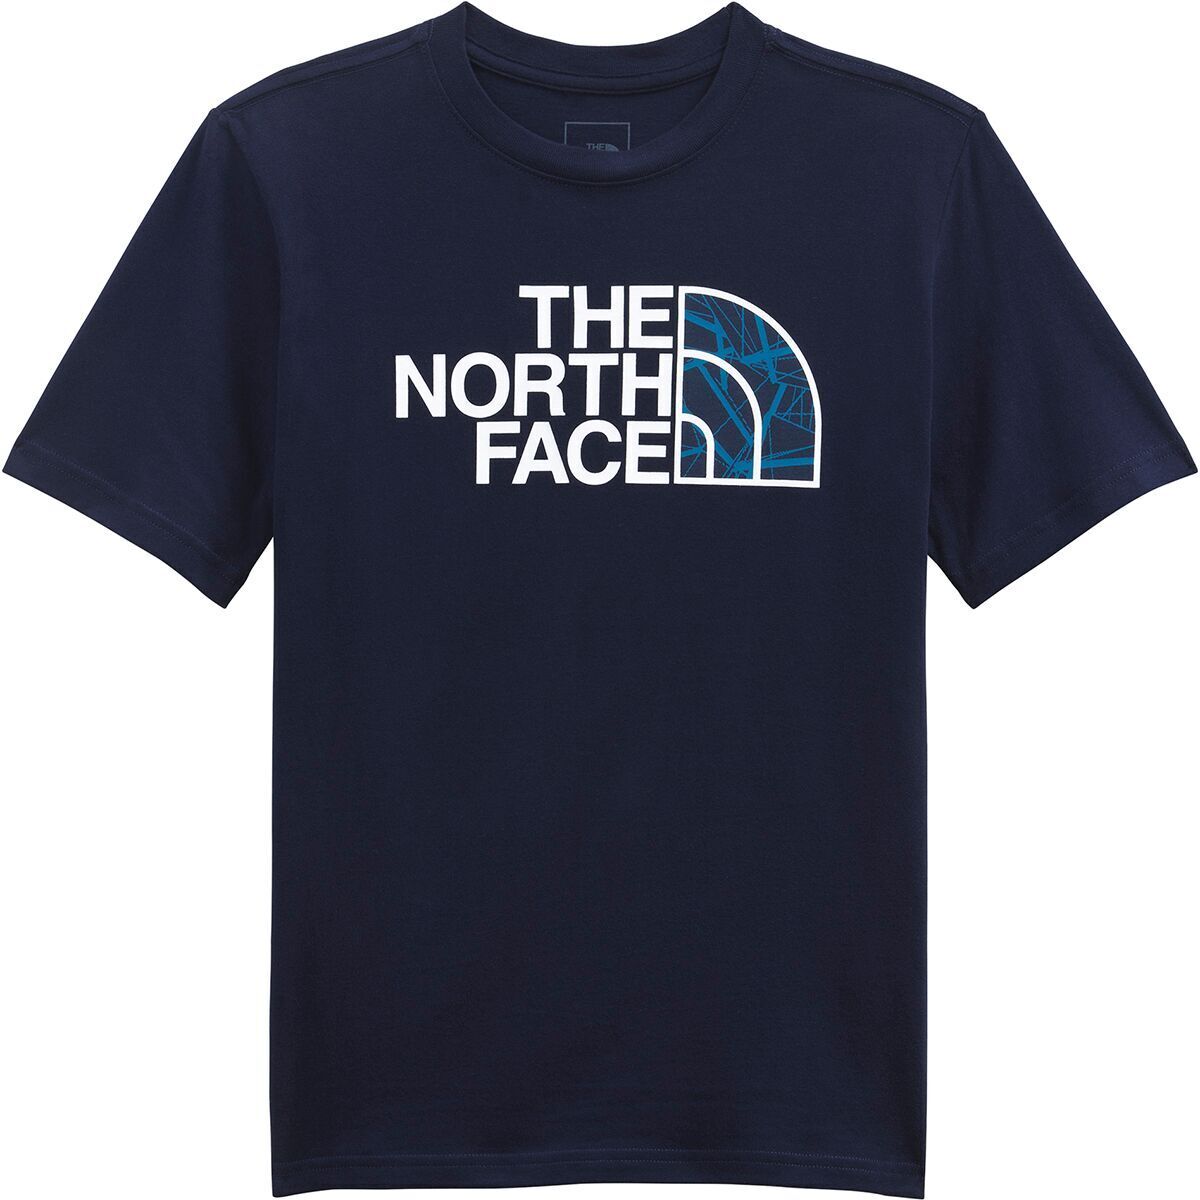 The North Face Graphic Short-Sleeve T-Shirt - Boys'